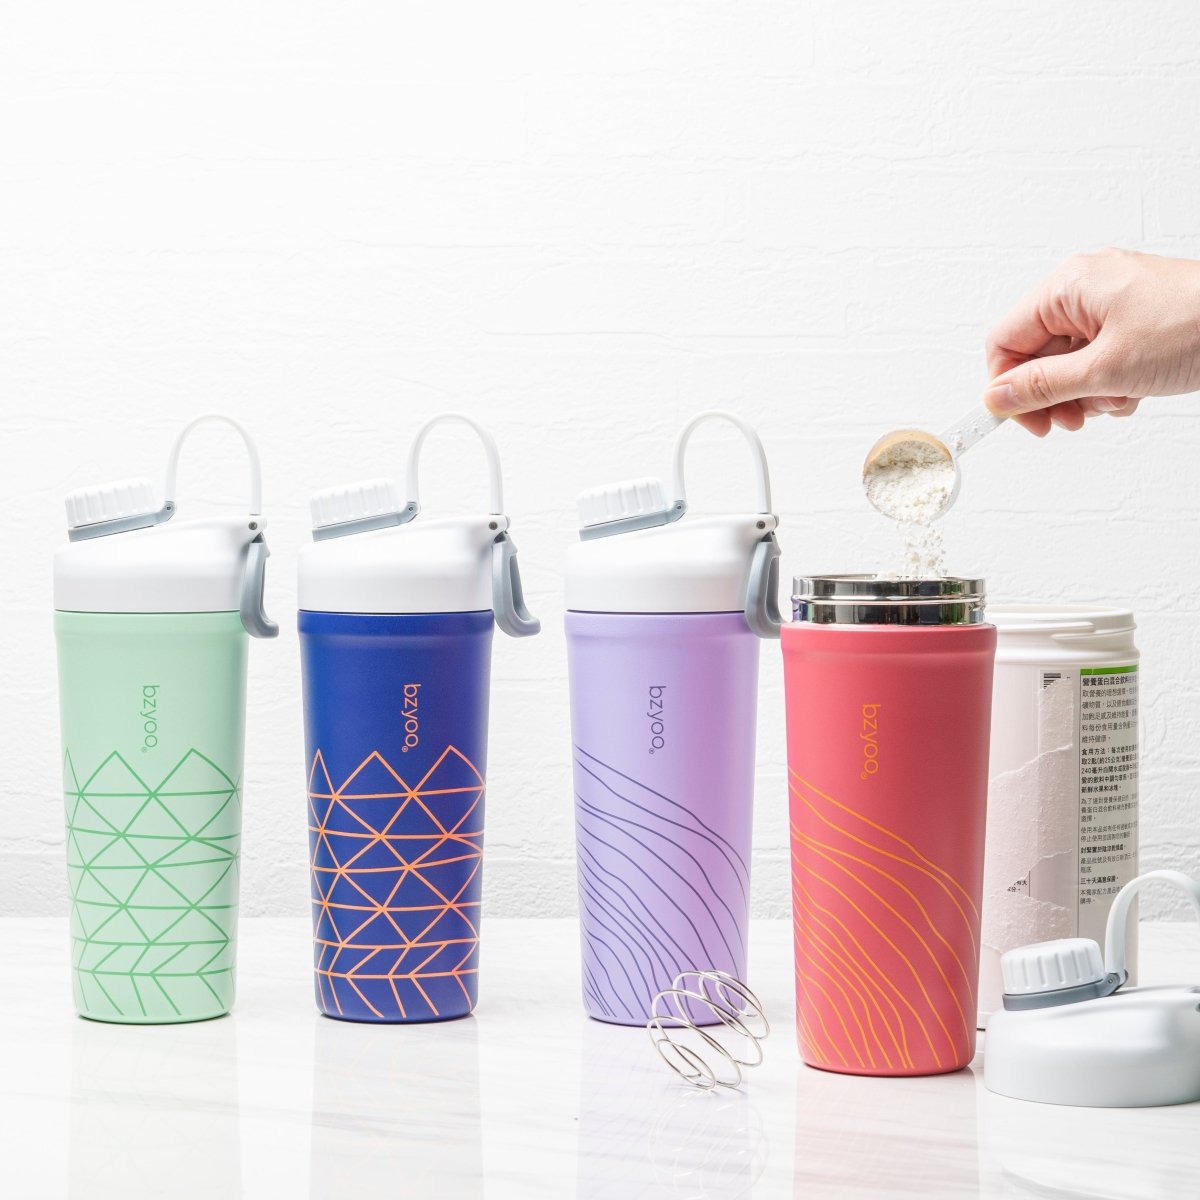 Double Wall Stainless Steel Shaker Bottle for Protein Mixes - HLB-B-71AW -  IdeaStage Promotional Products